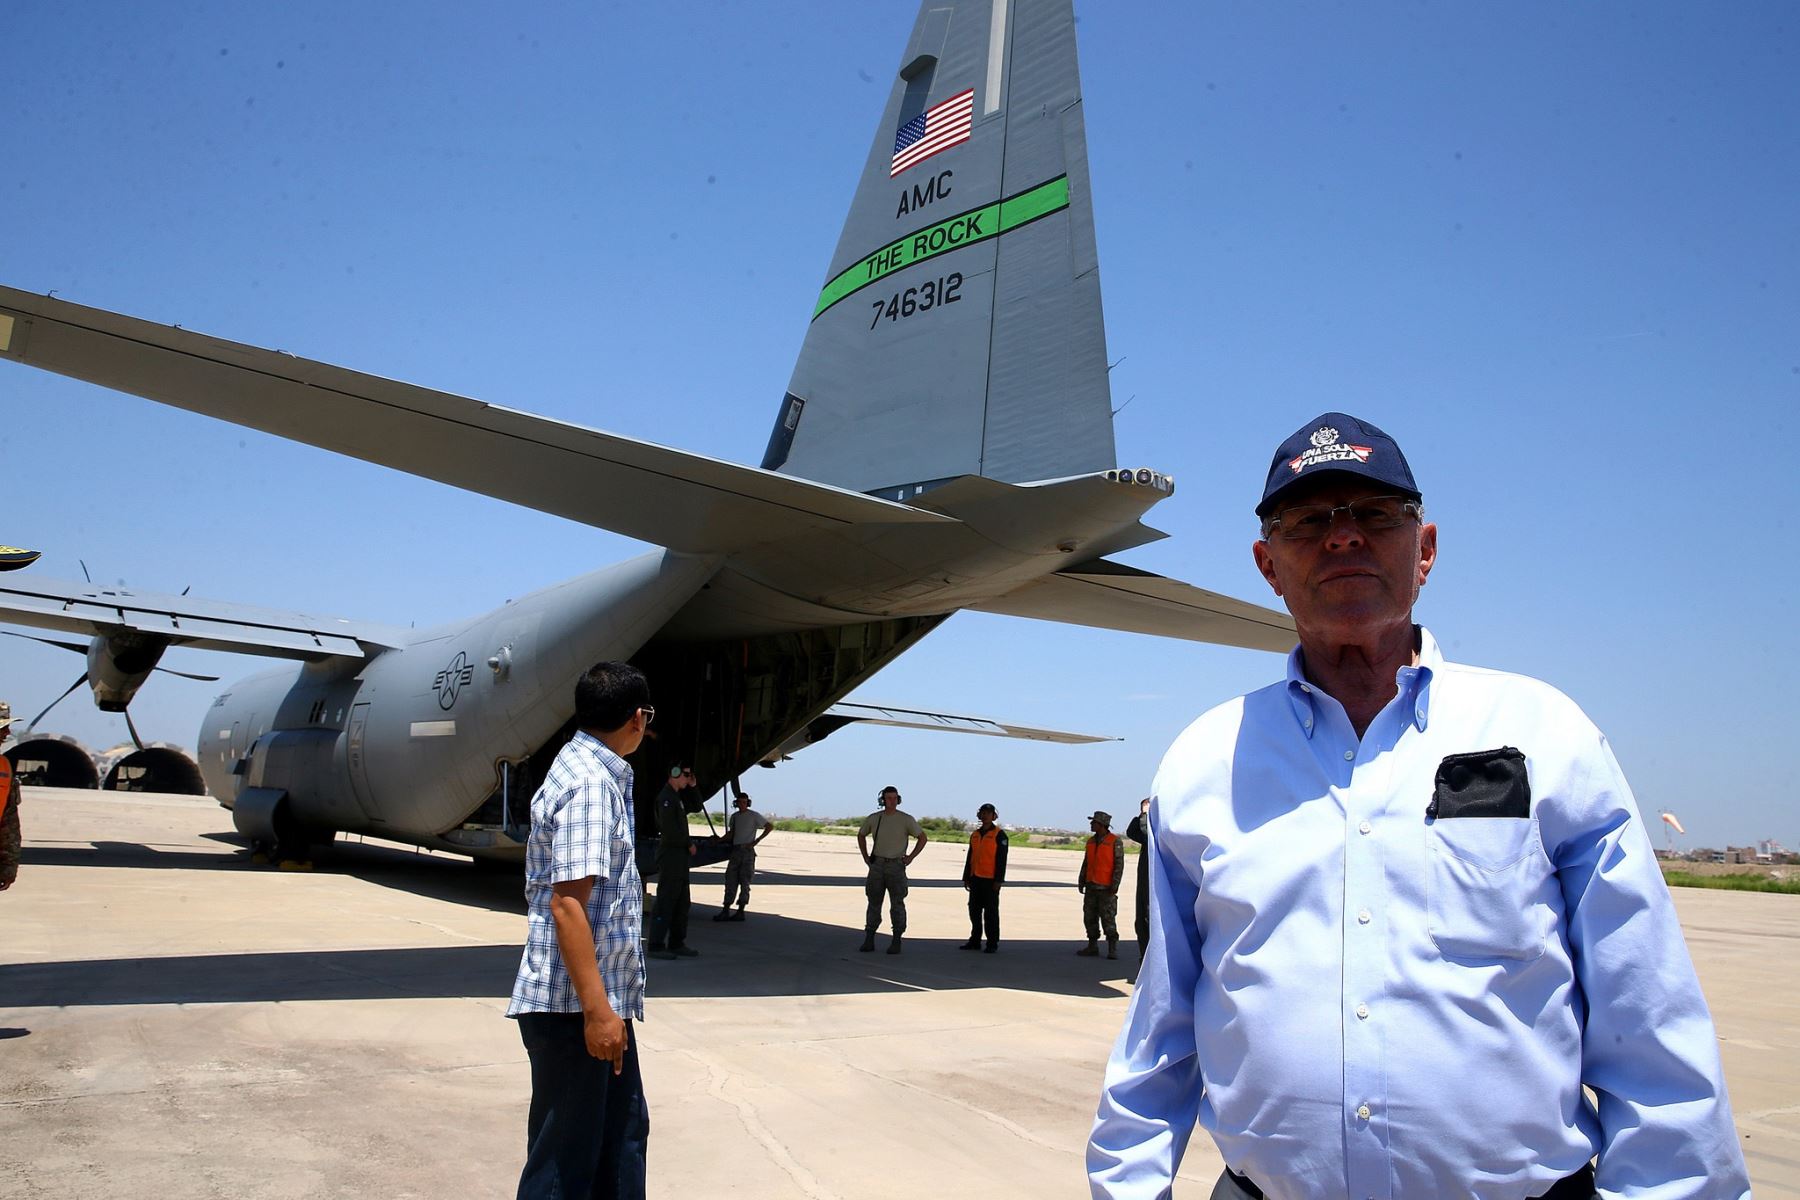 Peru President welcomes U.S. C-130 aircraft in disaster-hit Chiclayo